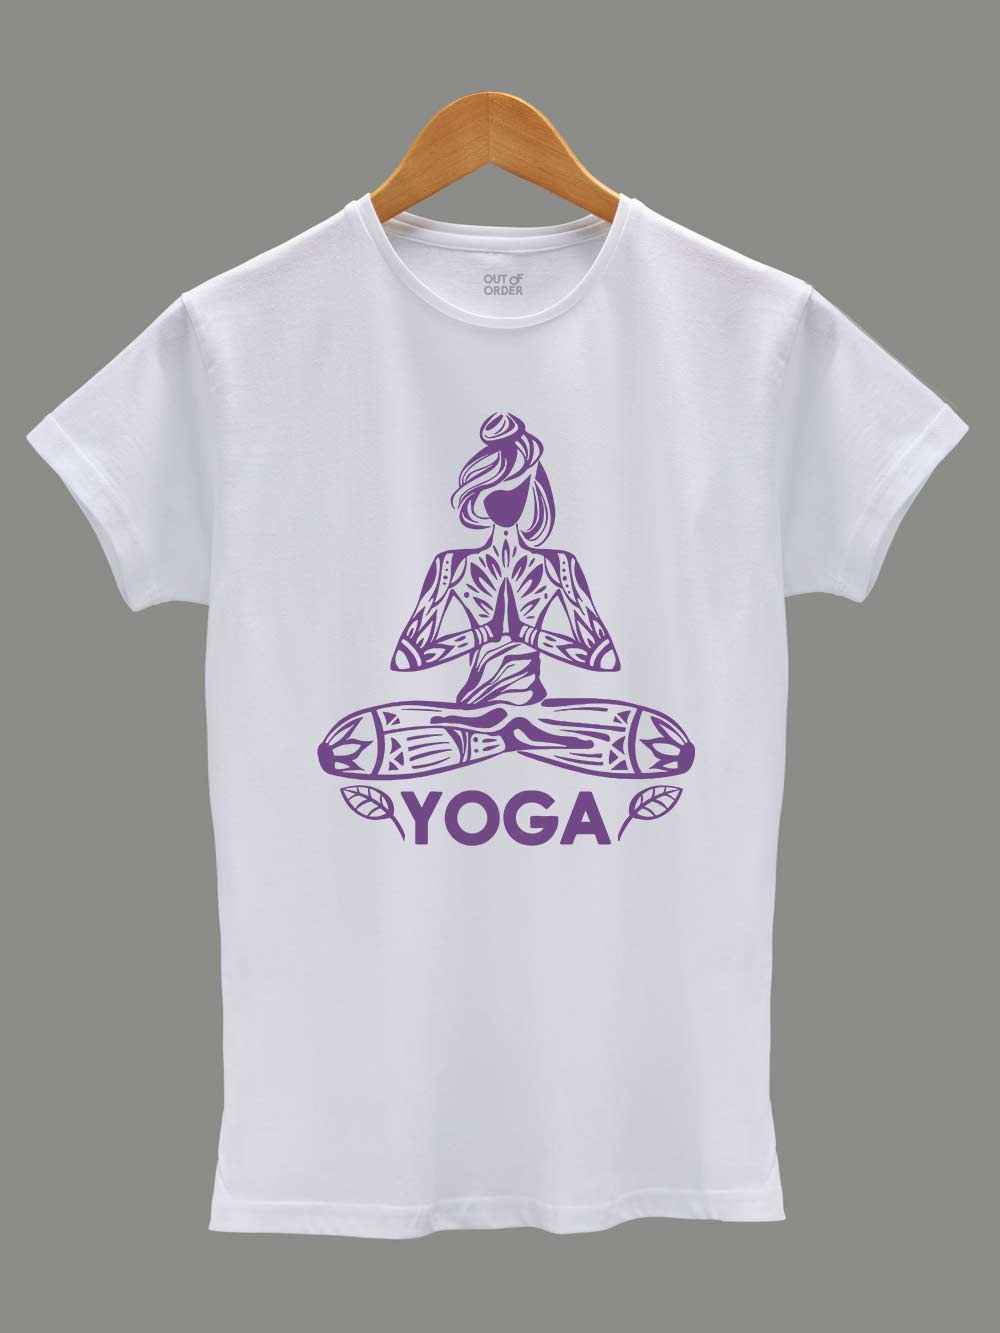 1.Pretty Meditation Yoga T-shirt Online India by Out of Order